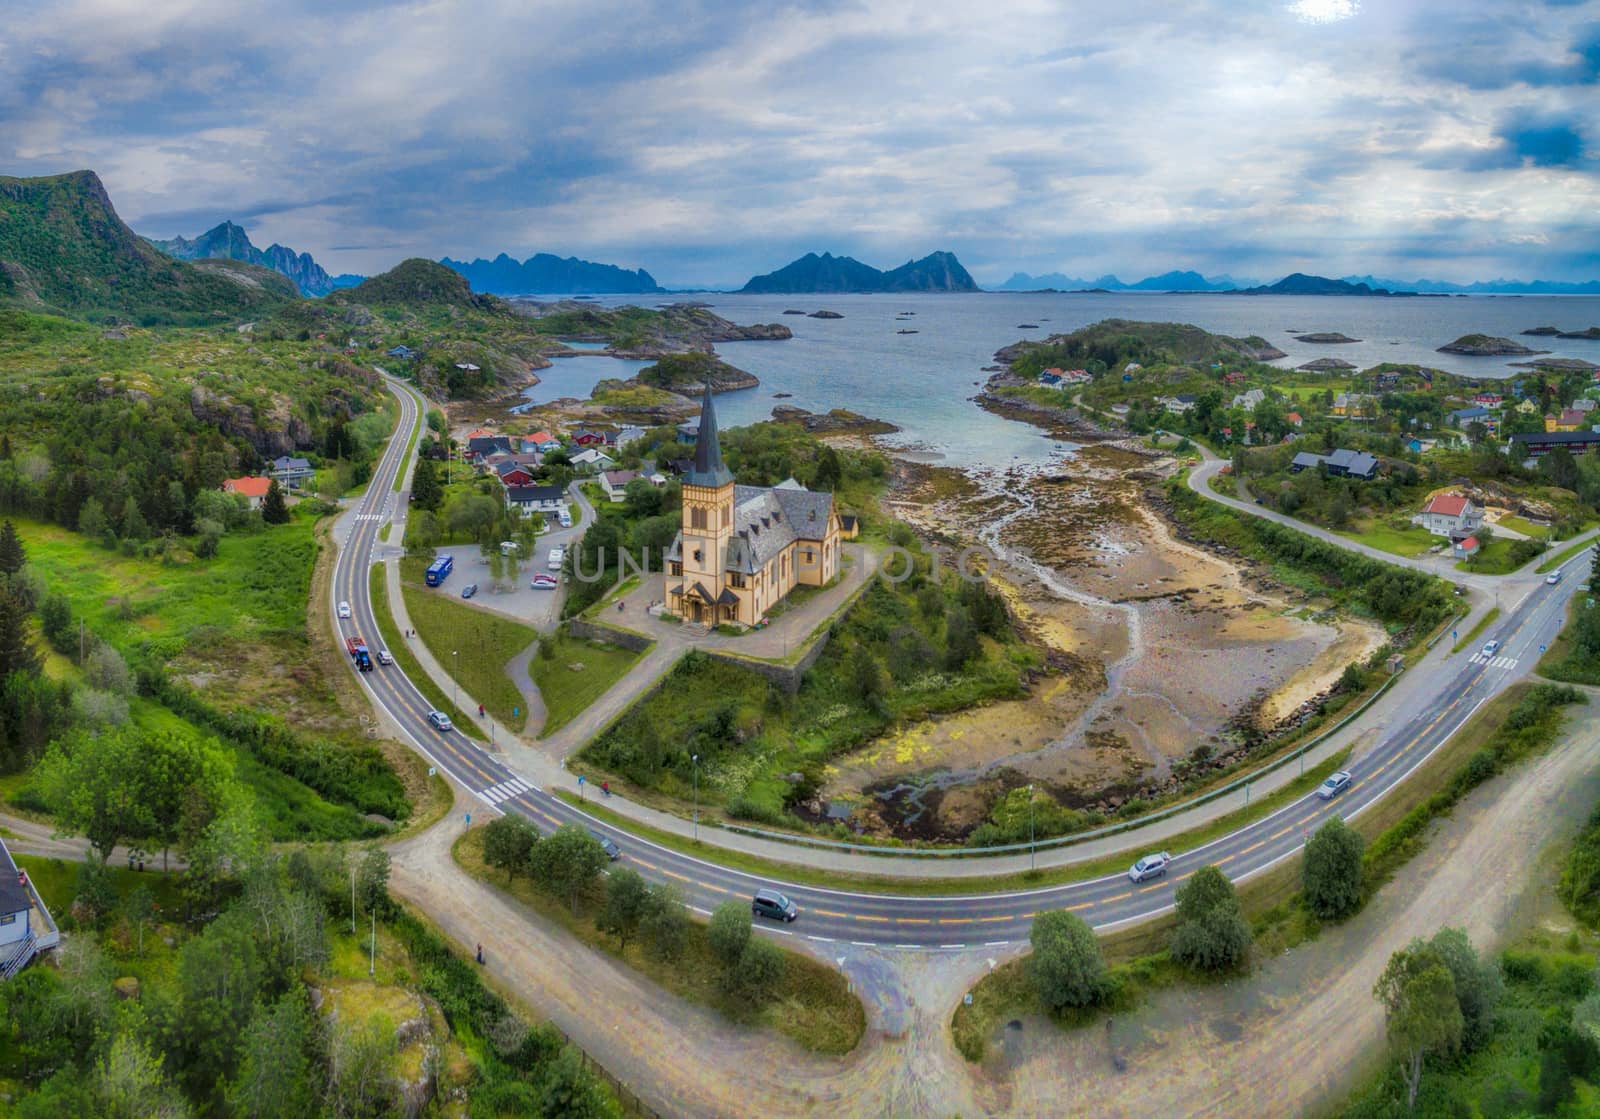 Vagan church also known as Lofoten cathedral seen from air